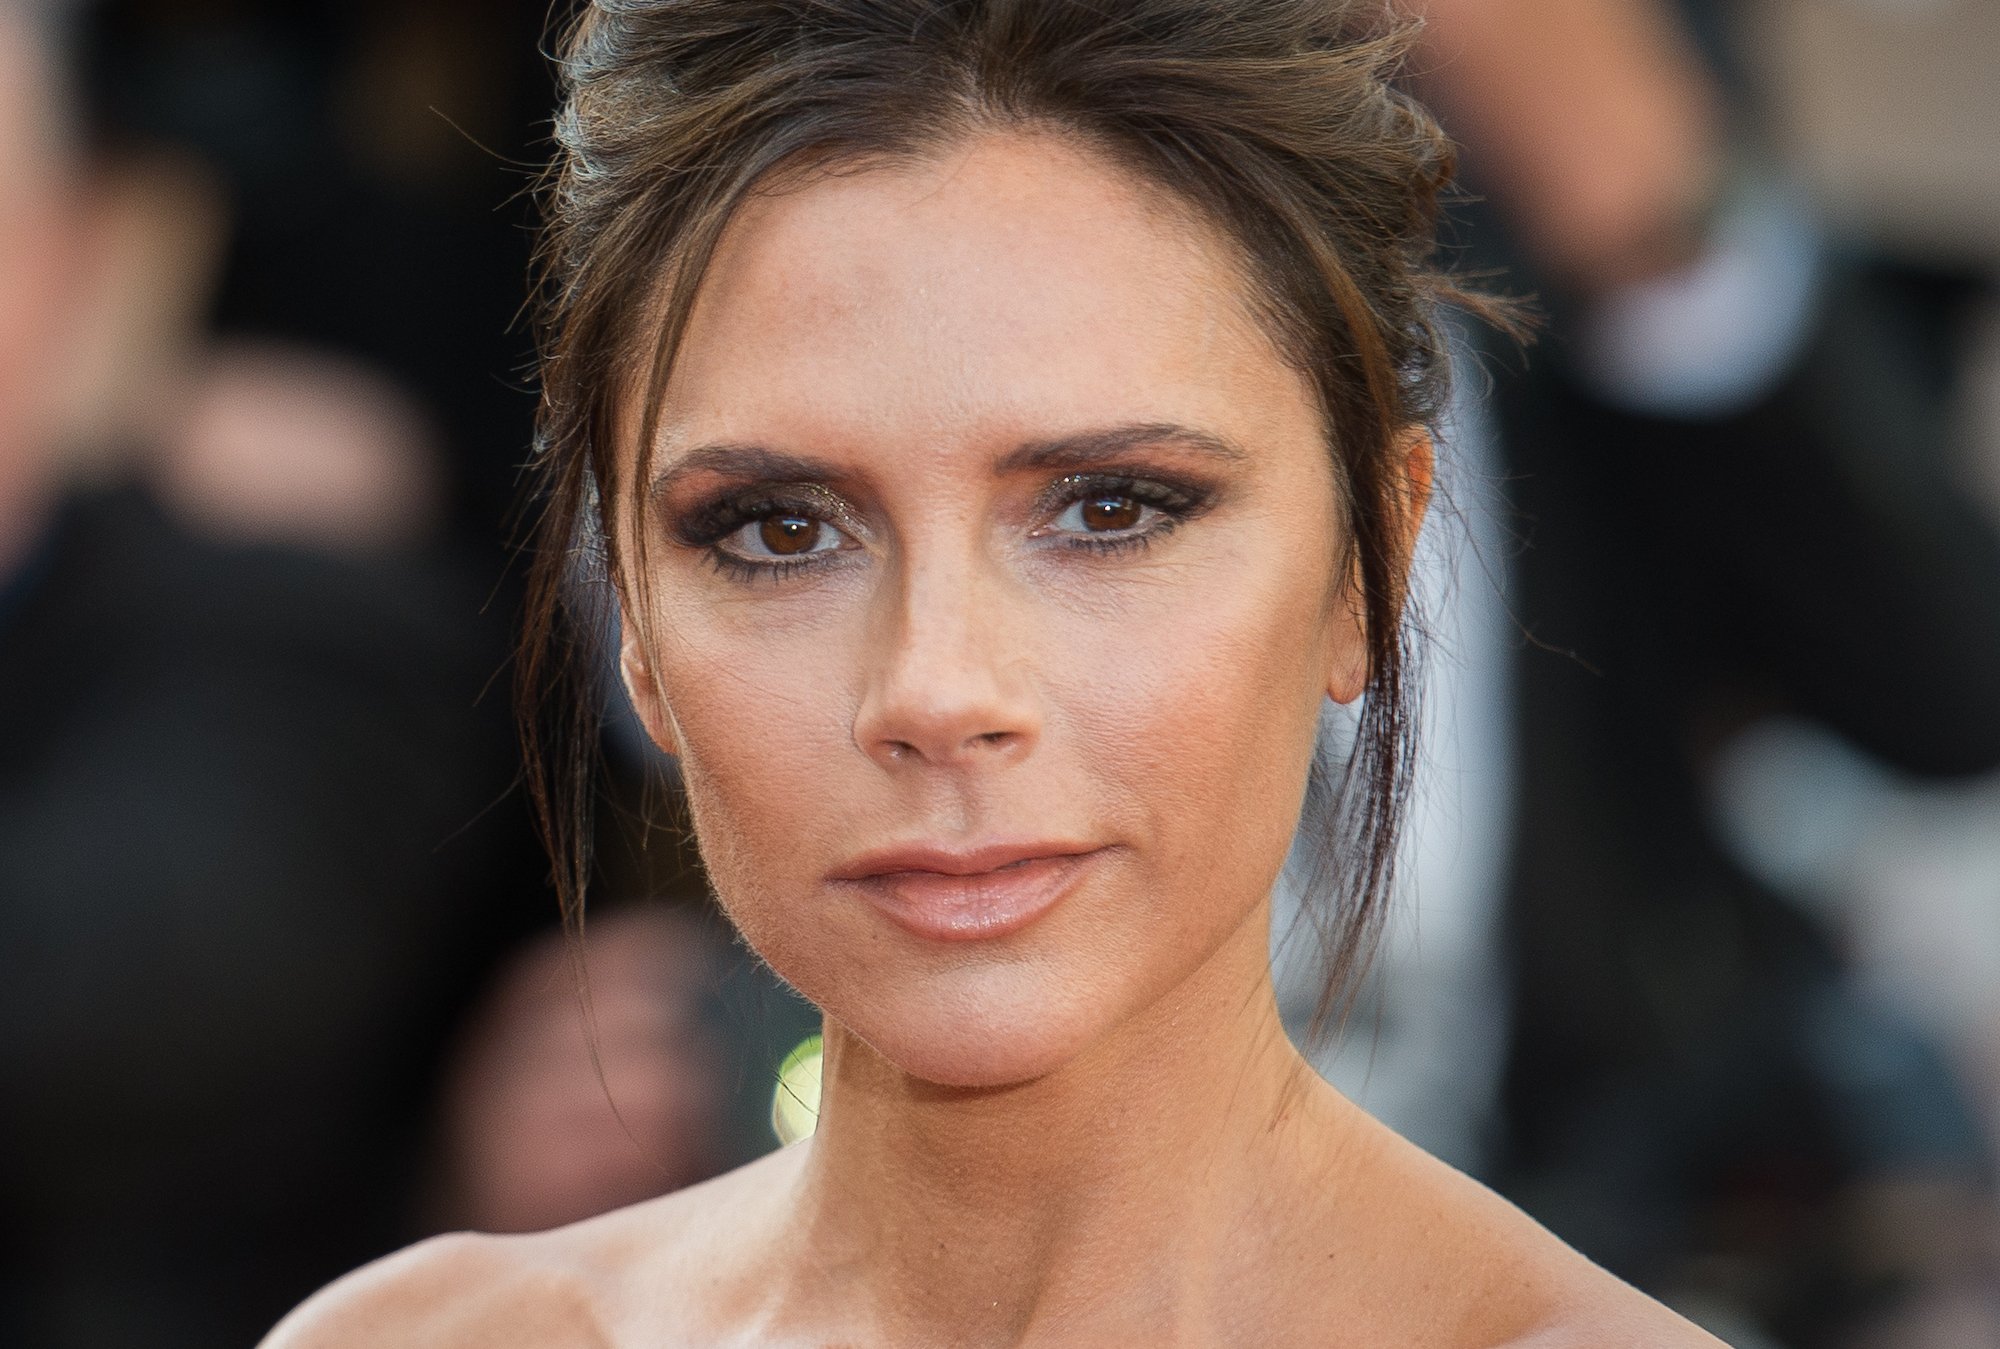 Why Doesn't Victoria Beckham Smile With Her Teeth?